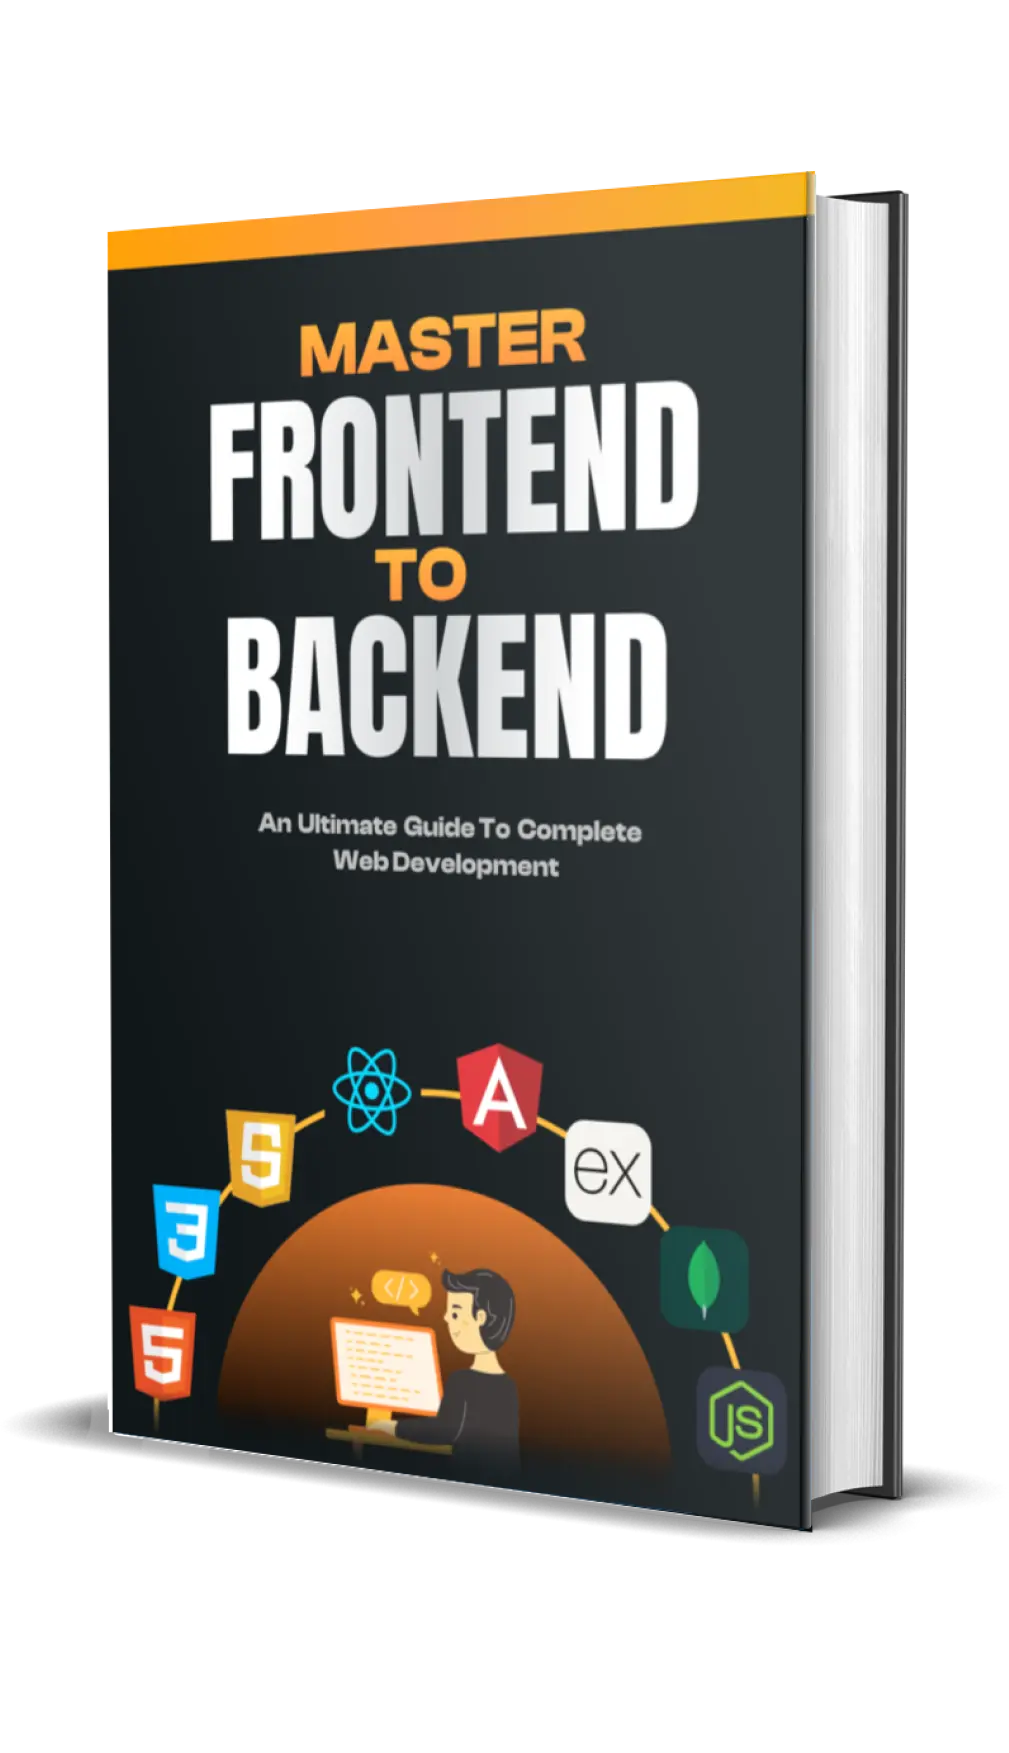 Master Frontend to Backend eBook Cover